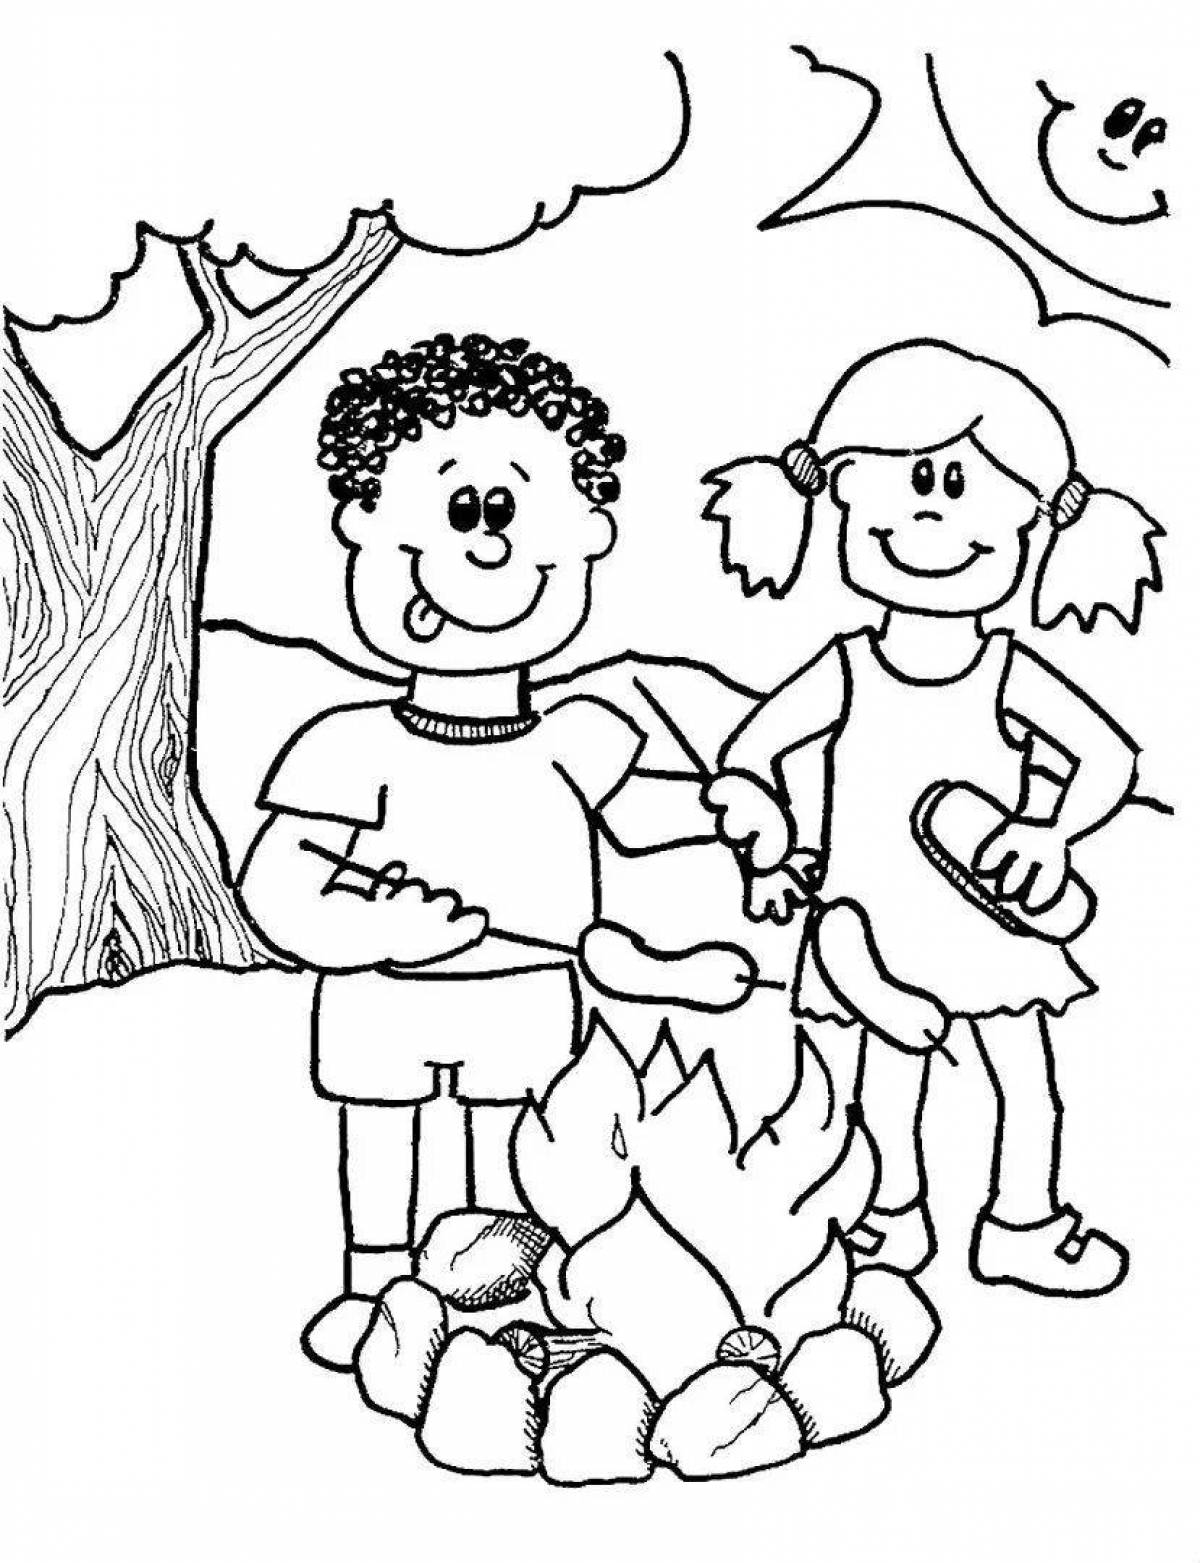 Violent coloring for children rules of conduct in the forest